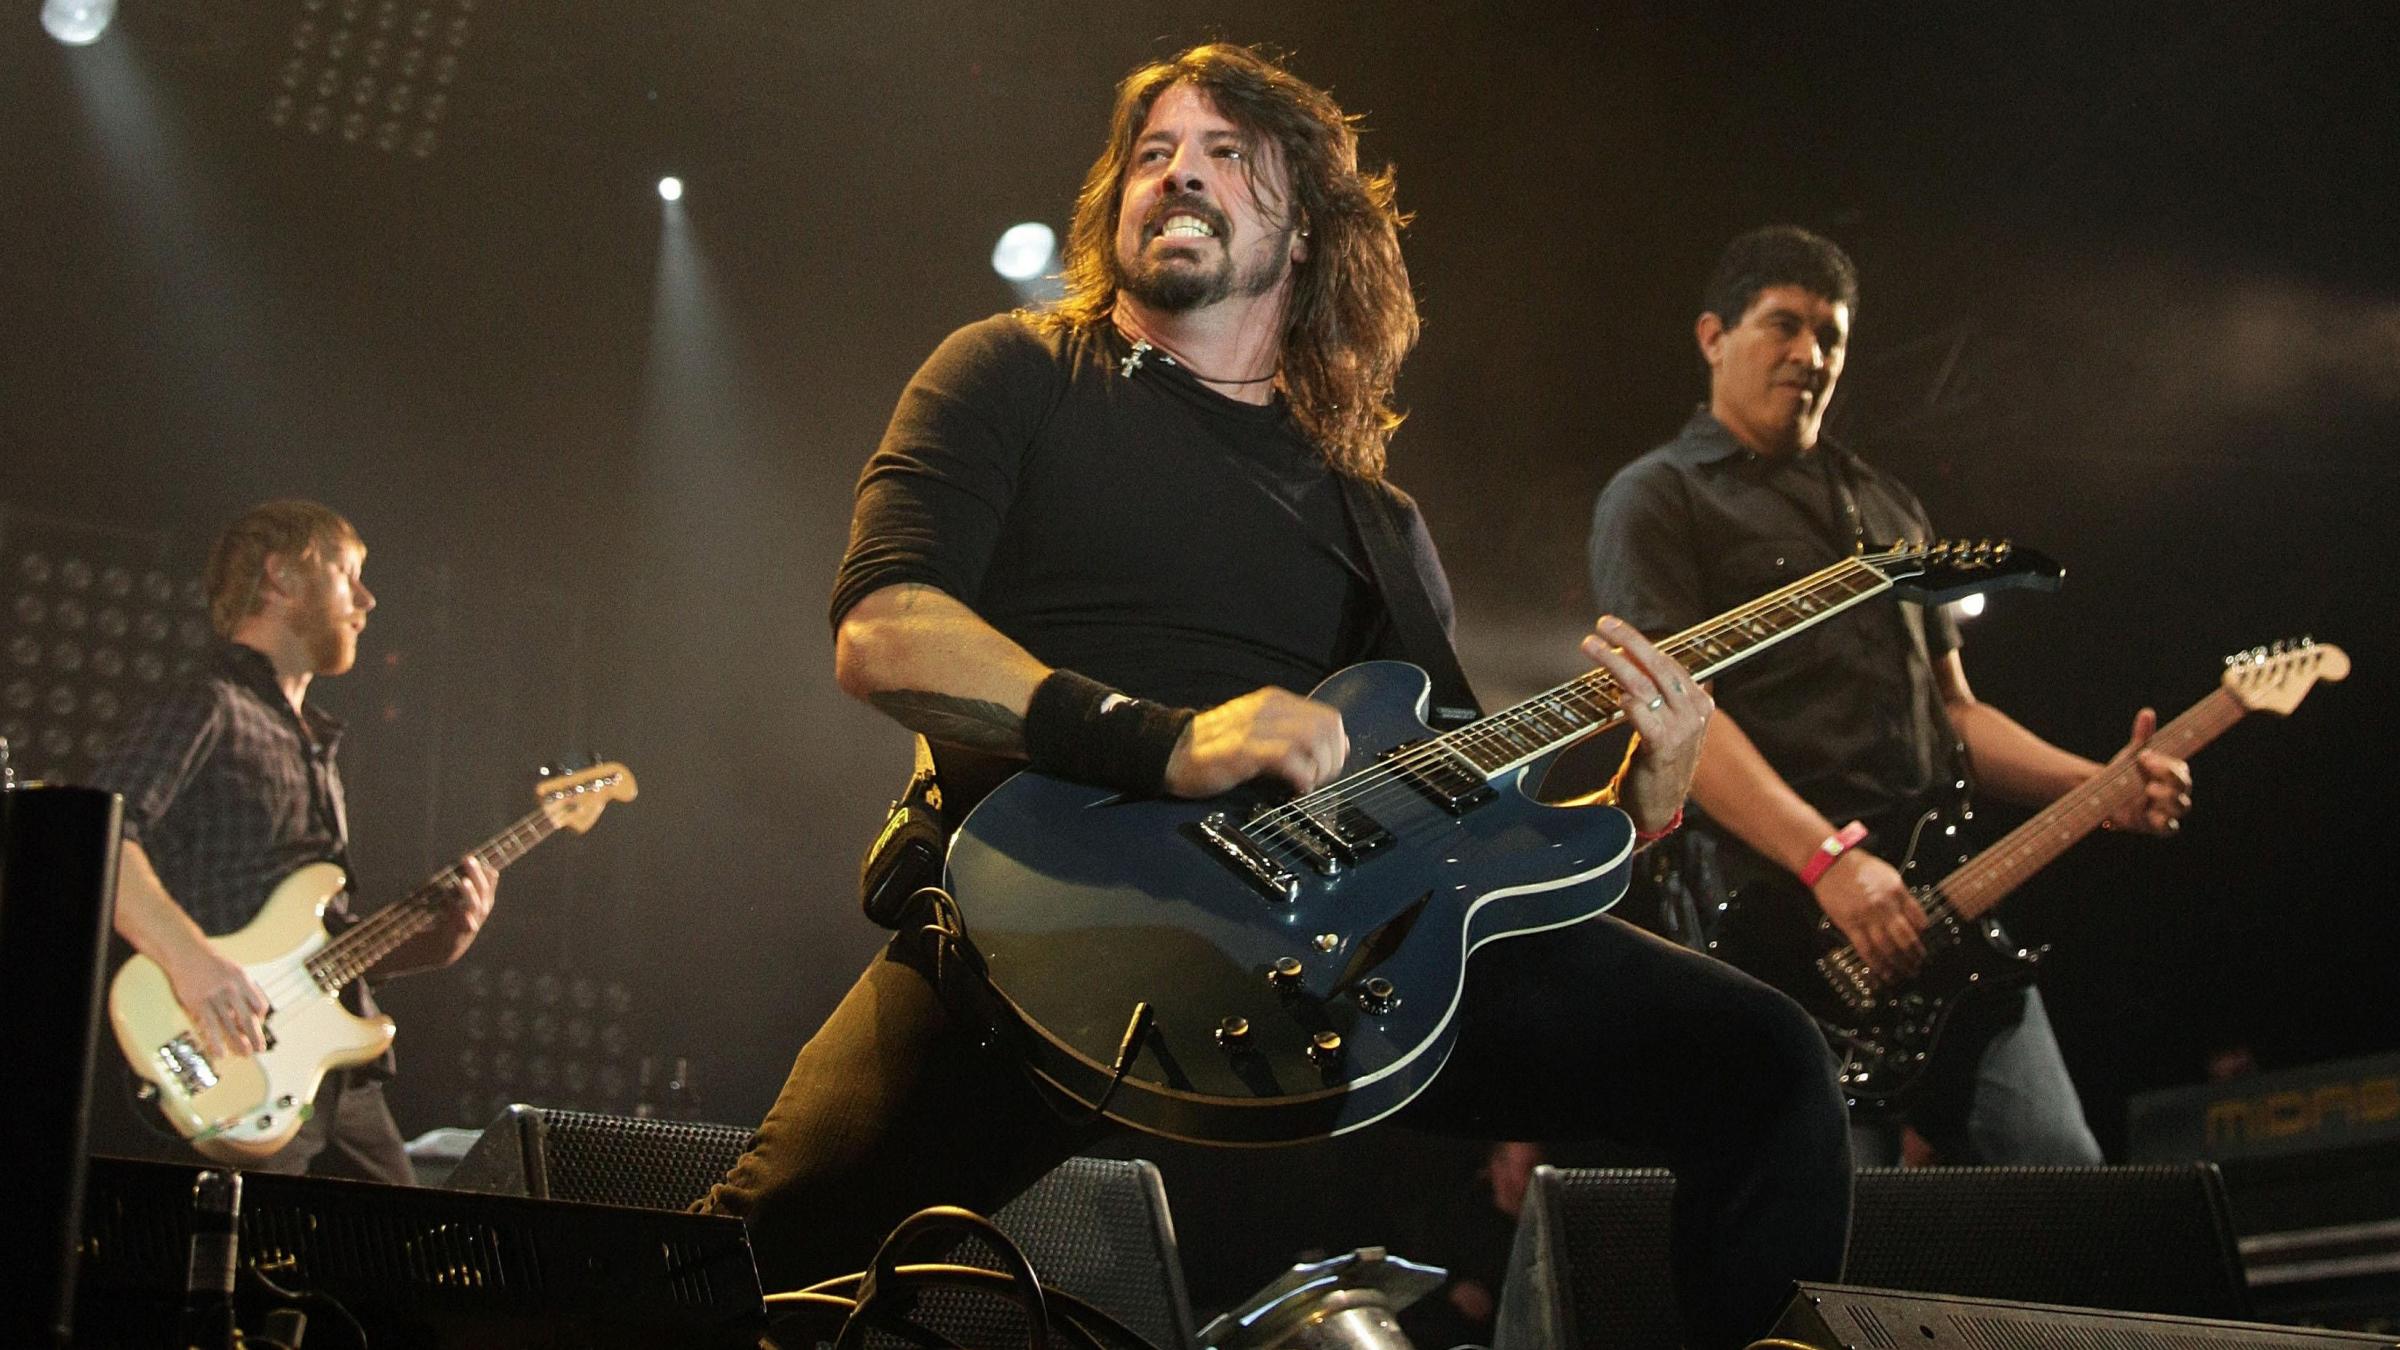 Dave Grohl thanks Florence Welch for filling in at Glastonbury